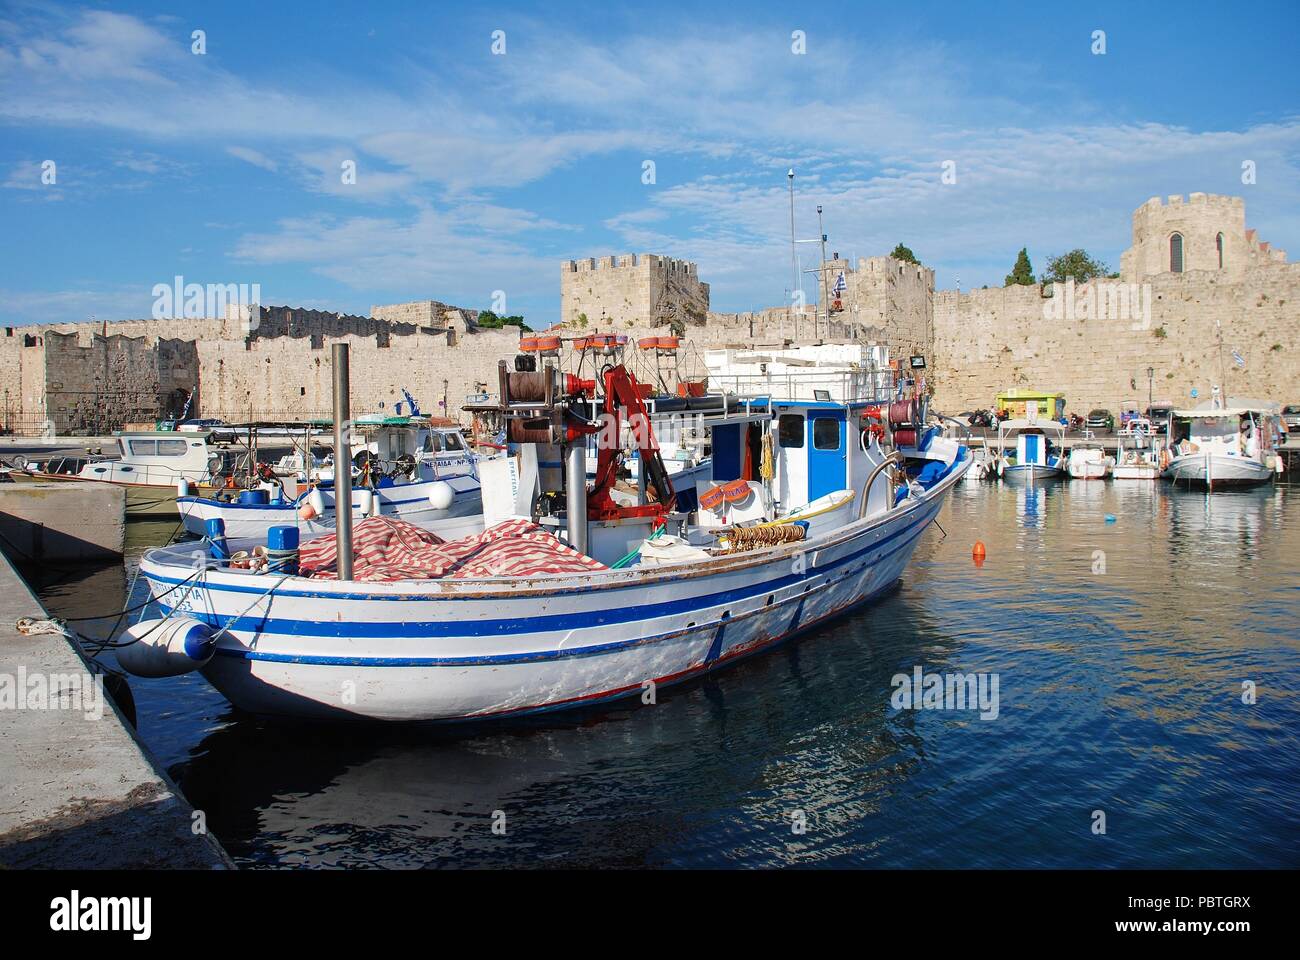 Boats moored in Kolona harbour in Rhodes Old Town on the Greek island of Rhodes on June 12, 2018. The Old Town is a UNESCO World Heritage Ste. Stock Photo